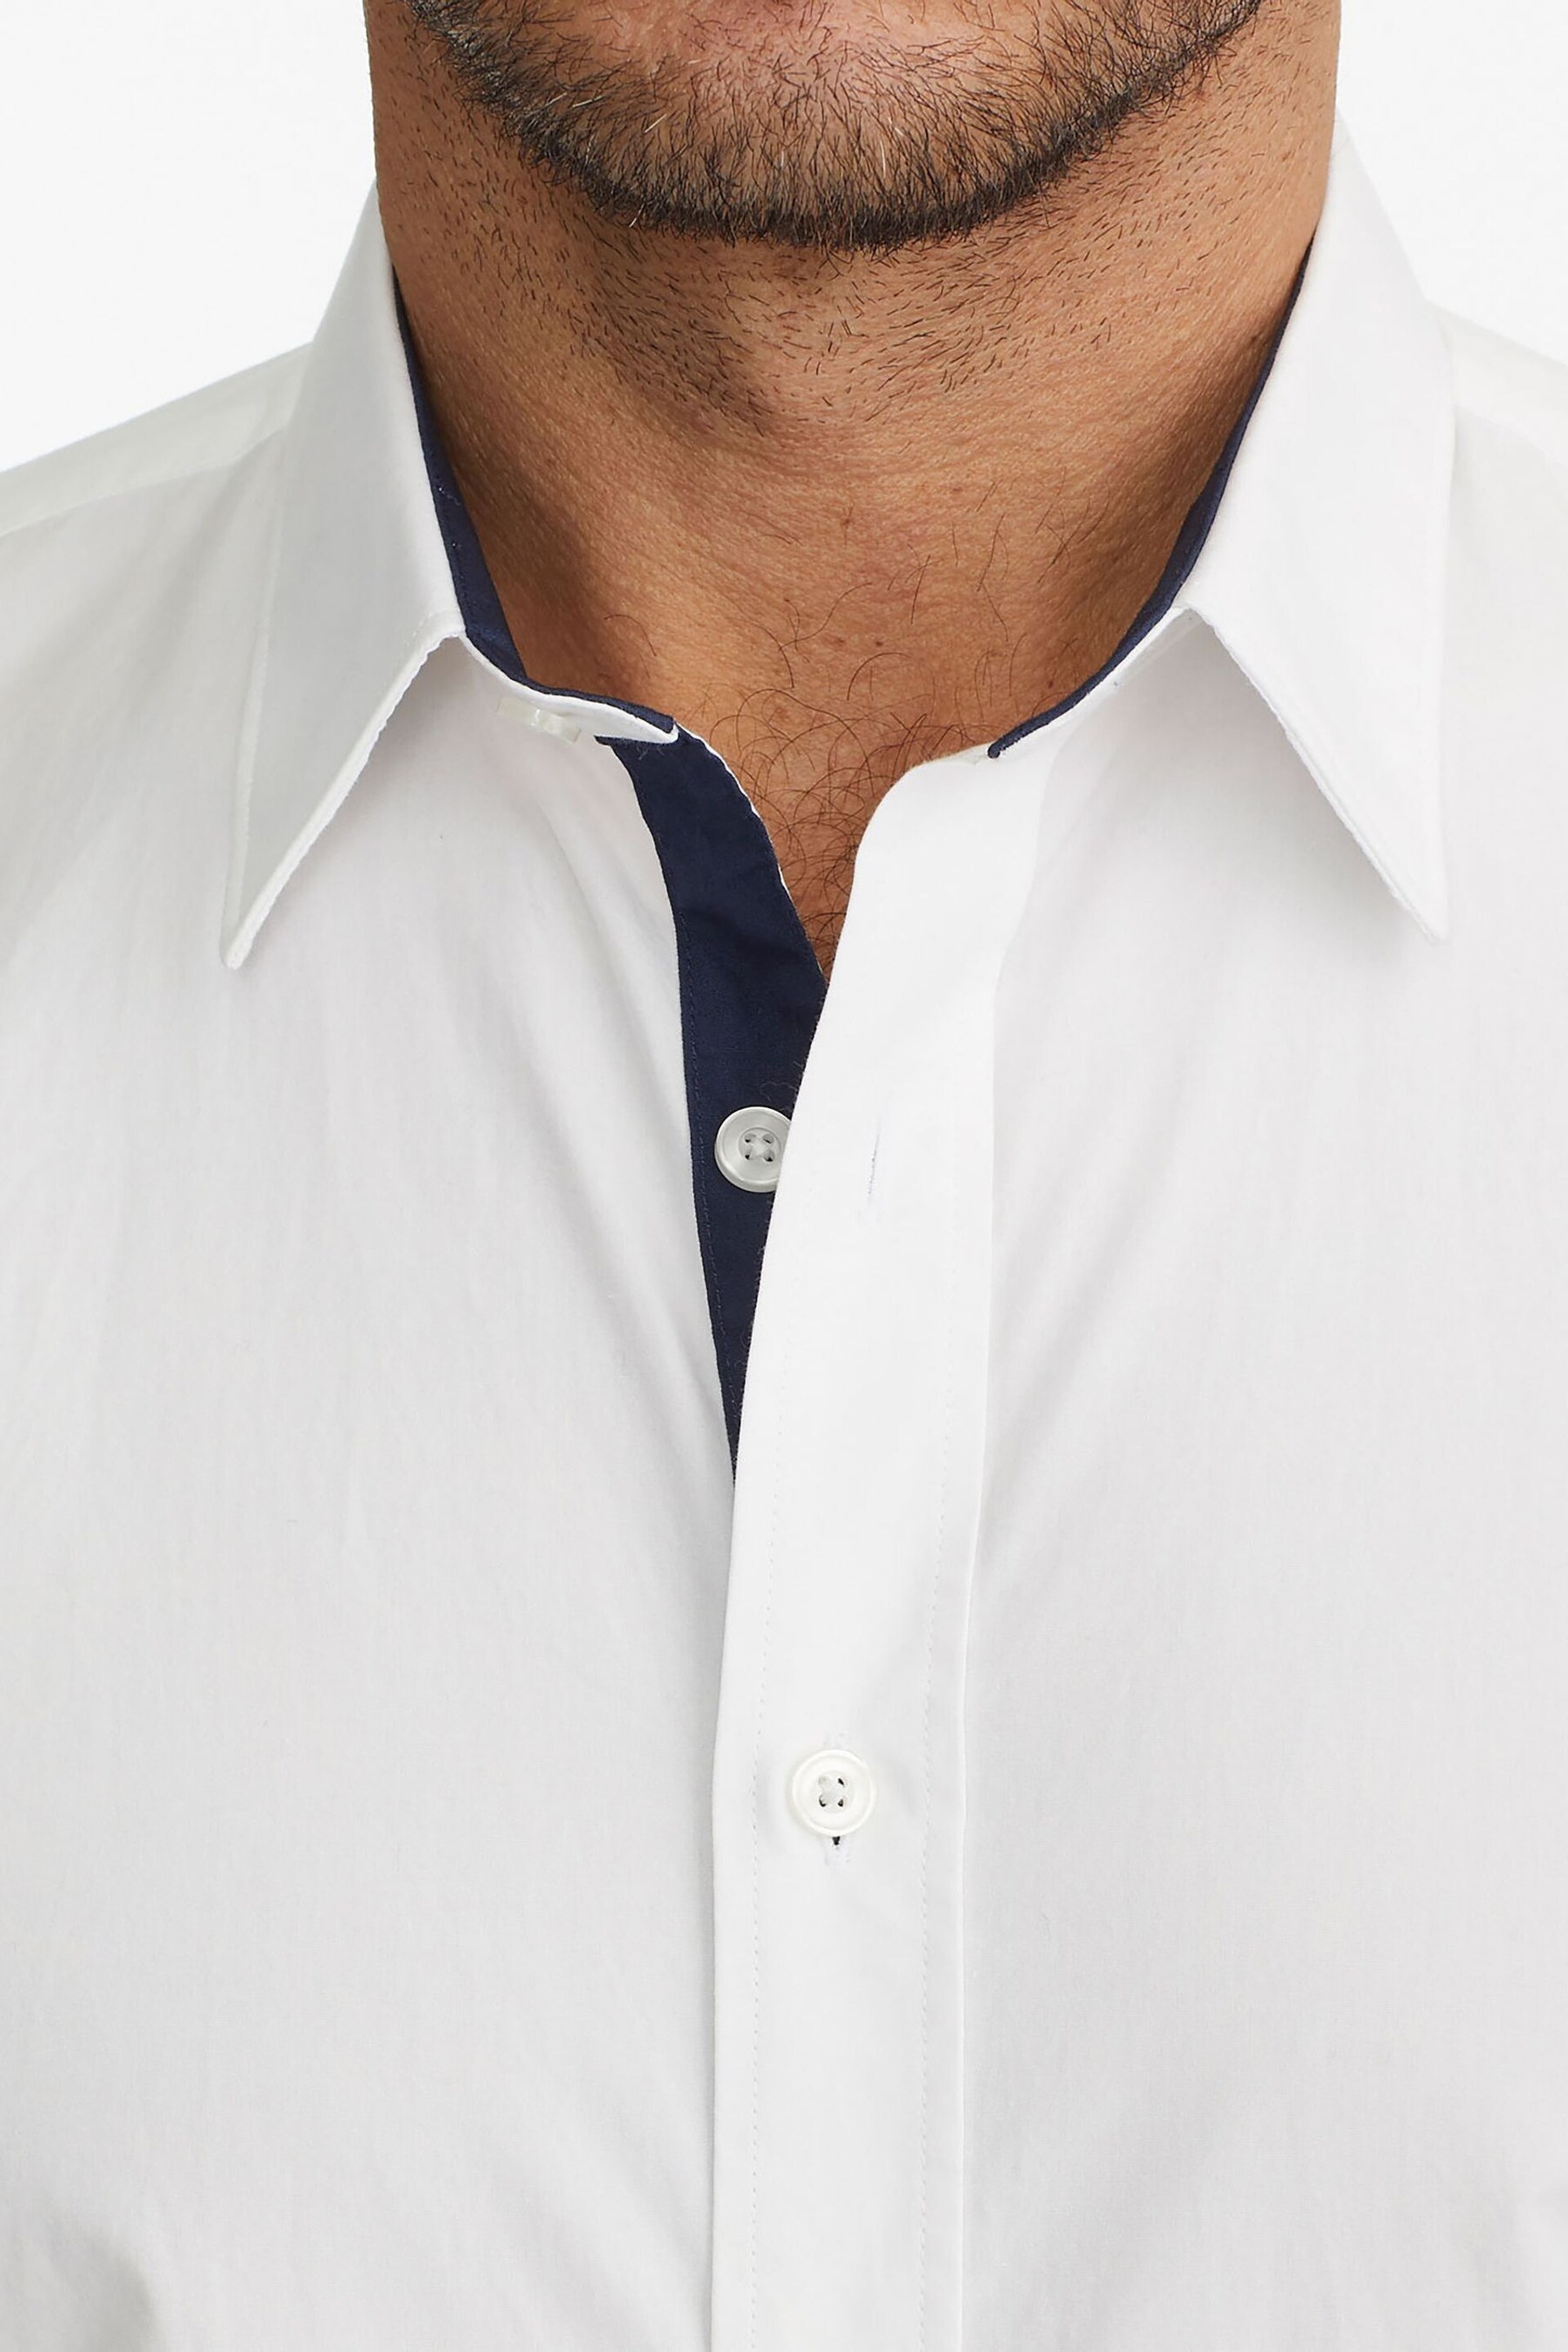 UNTUCKit White/Navy Wrinkle-Free Relaxed Fit Las Cases Special Shirt - Image 4 of 5